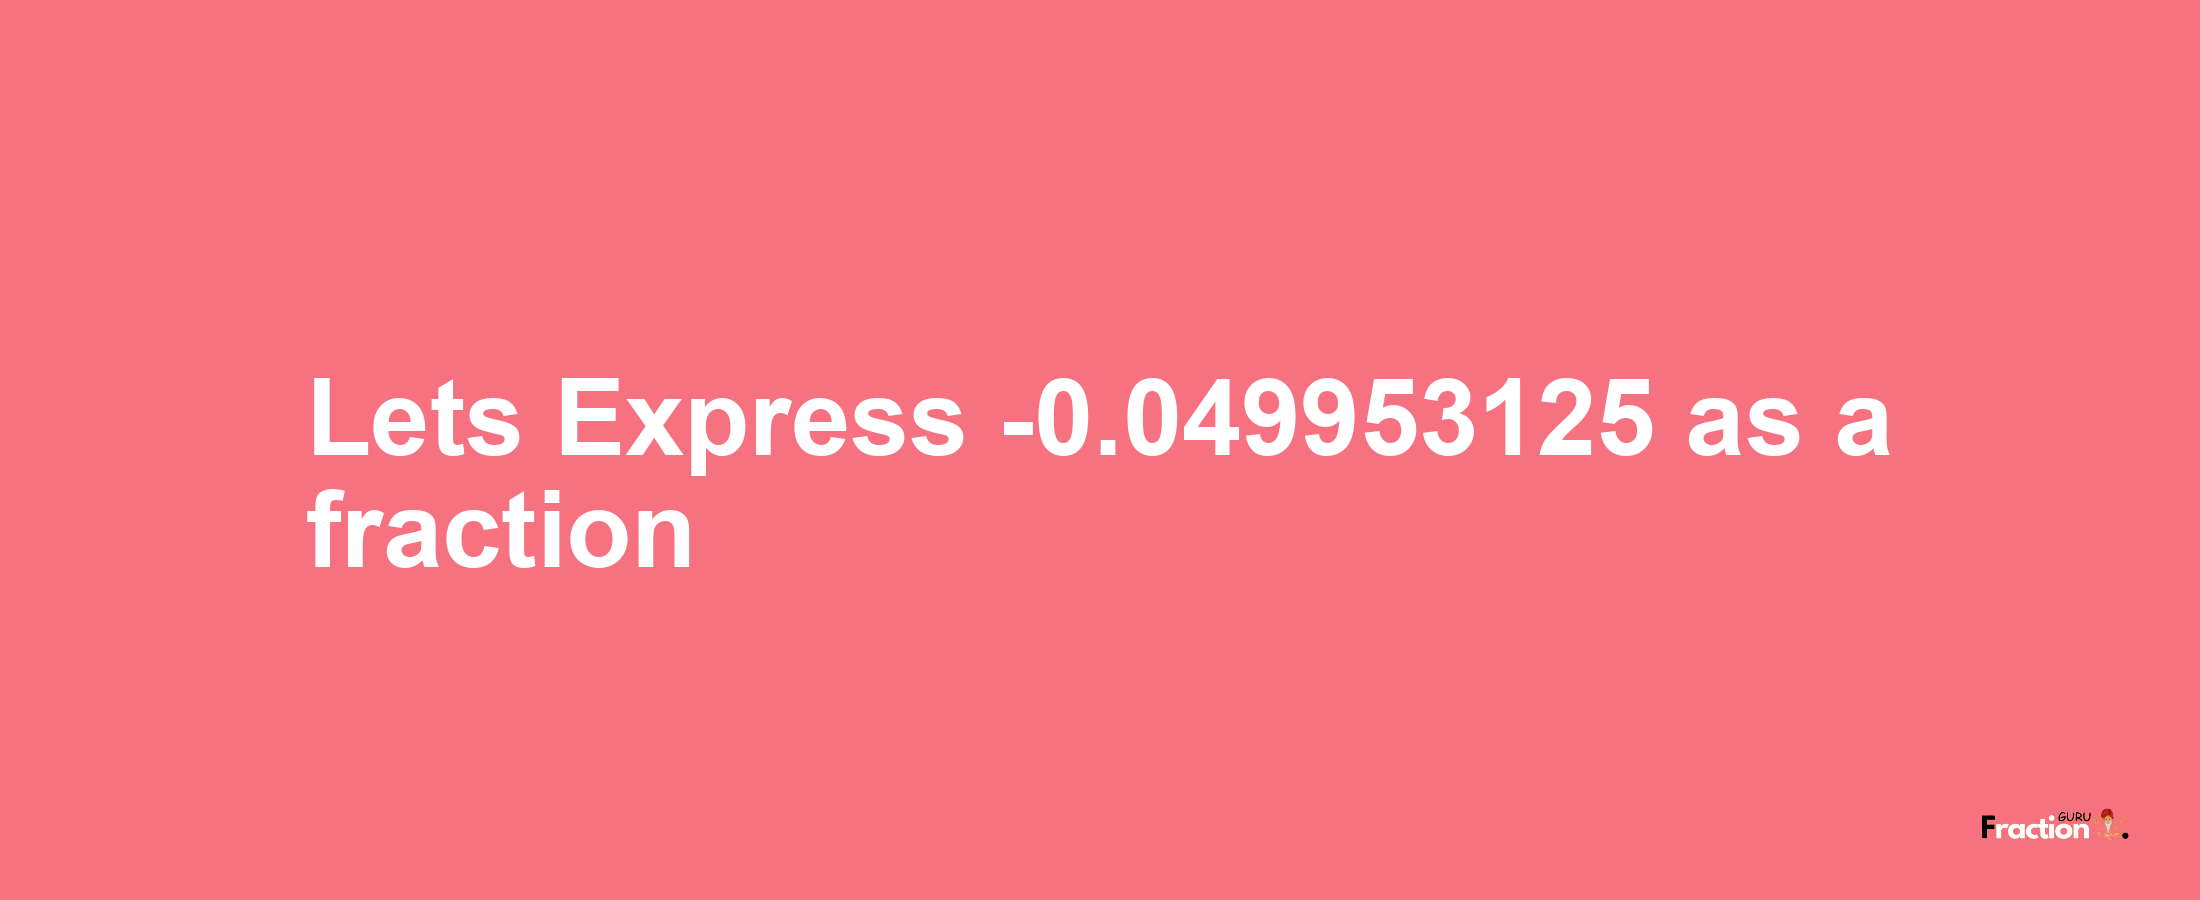 Lets Express -0.049953125 as afraction